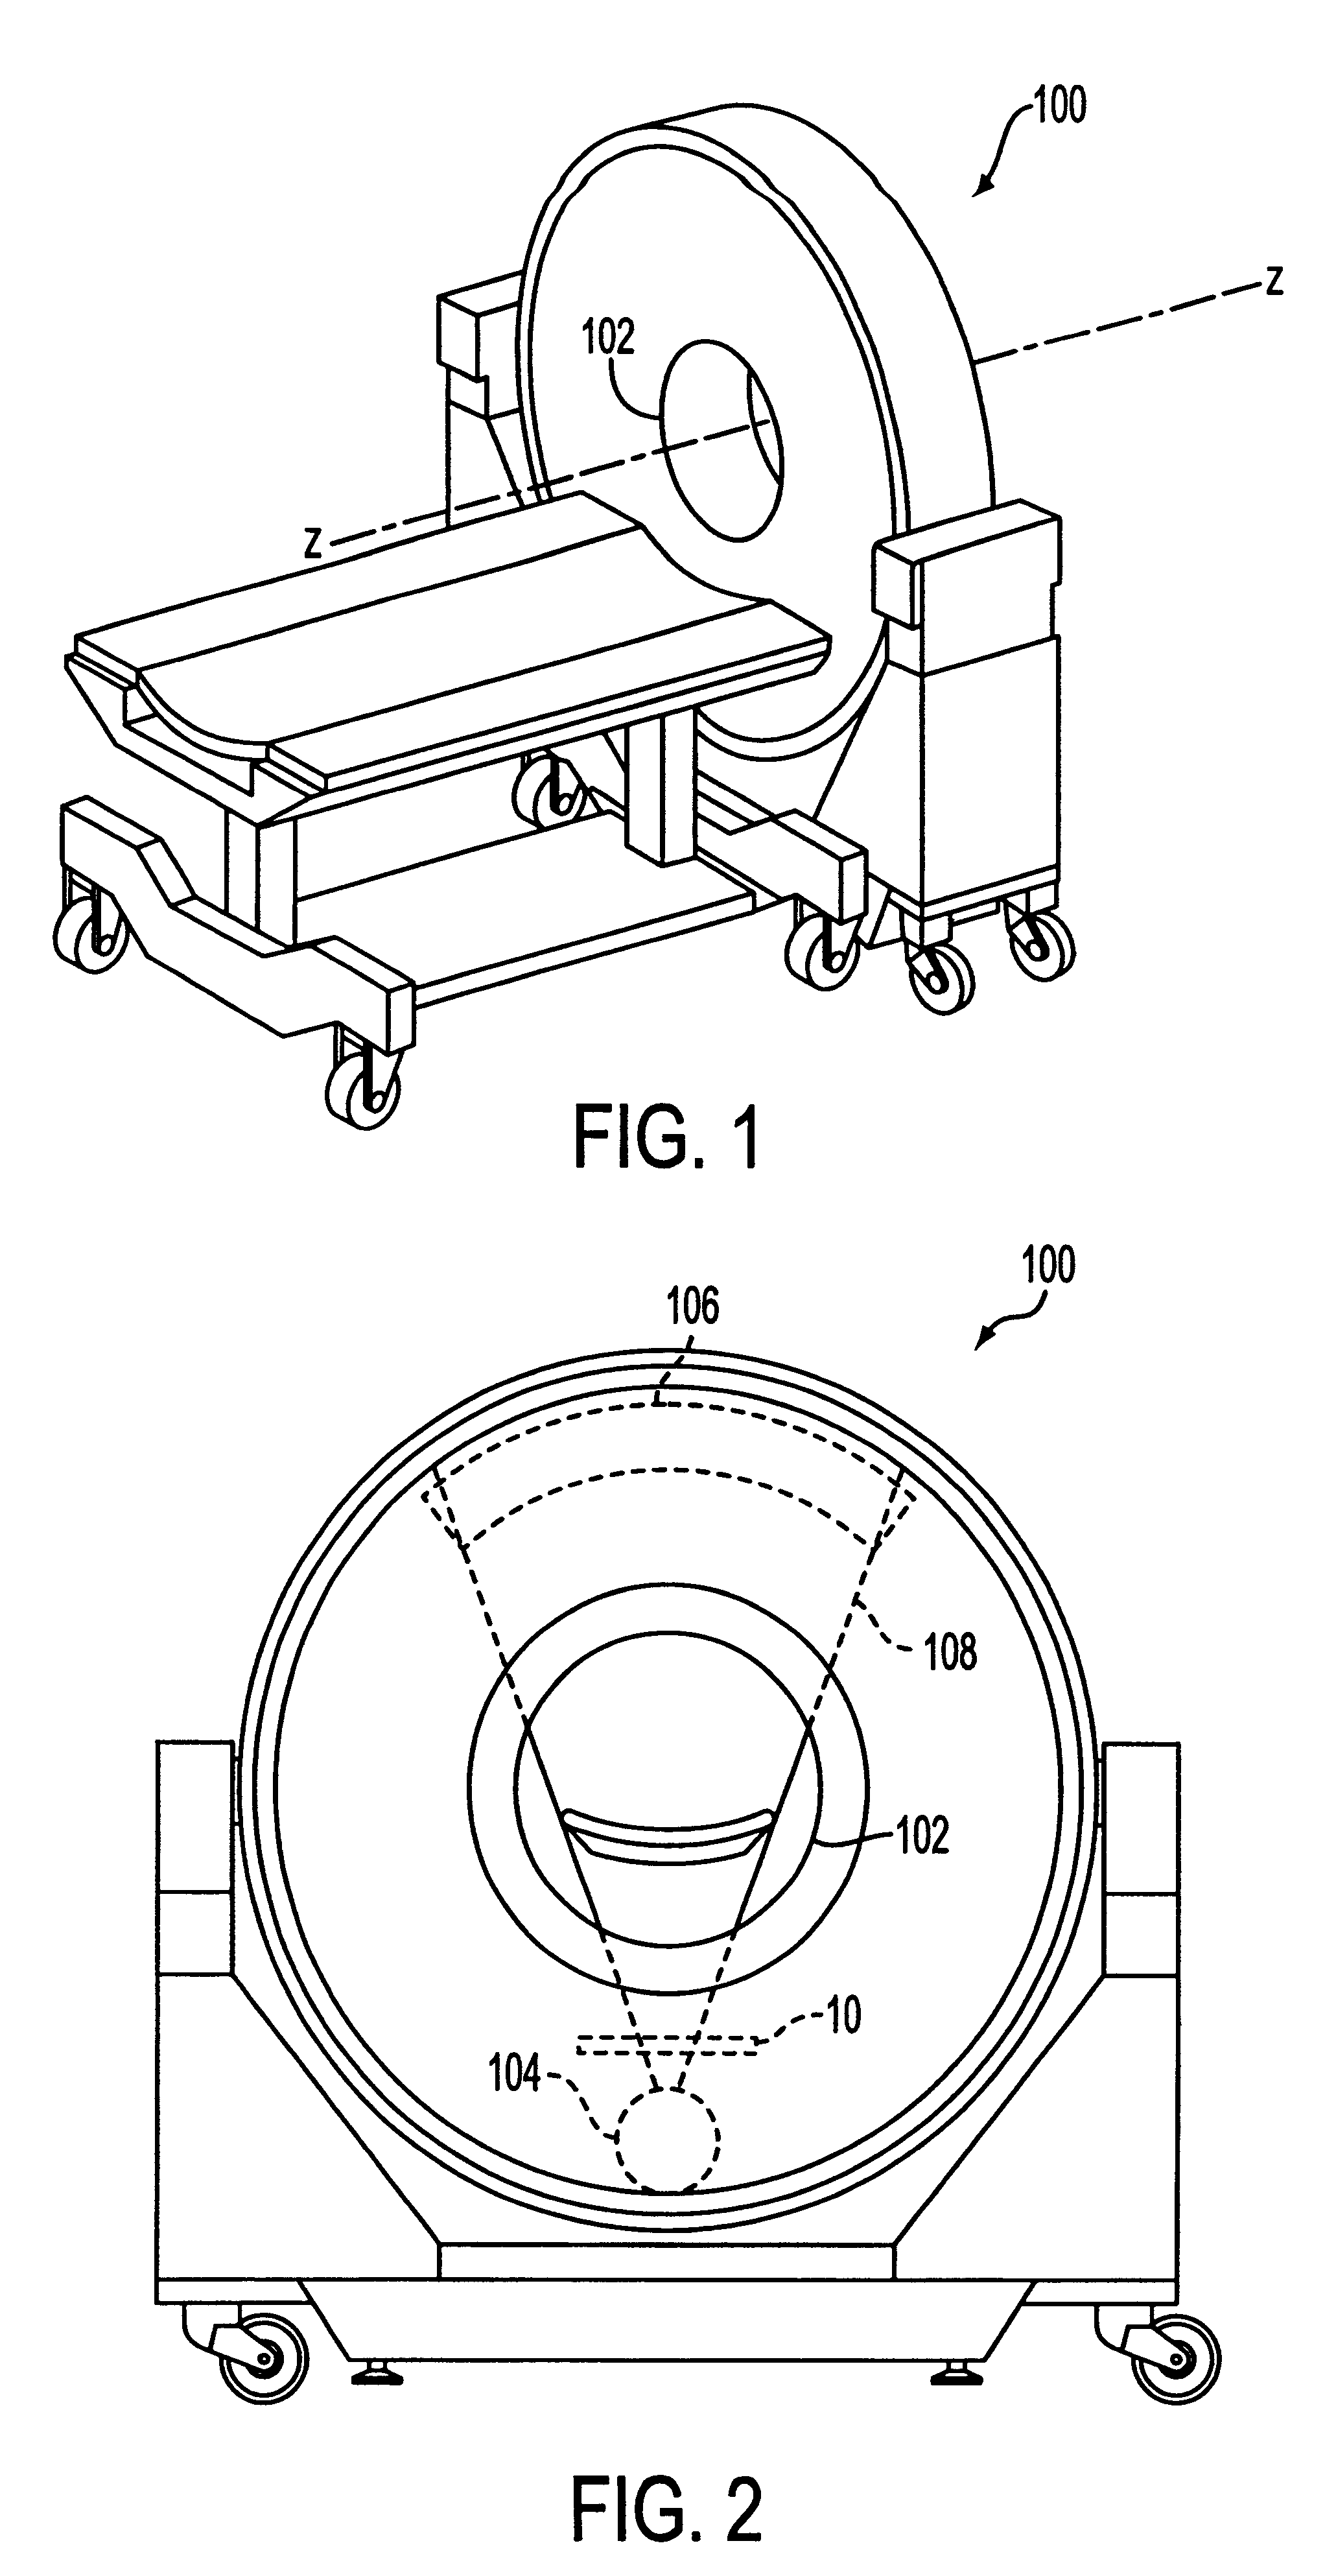 X-ray collimator and method of manufacturing an x-ray collimator